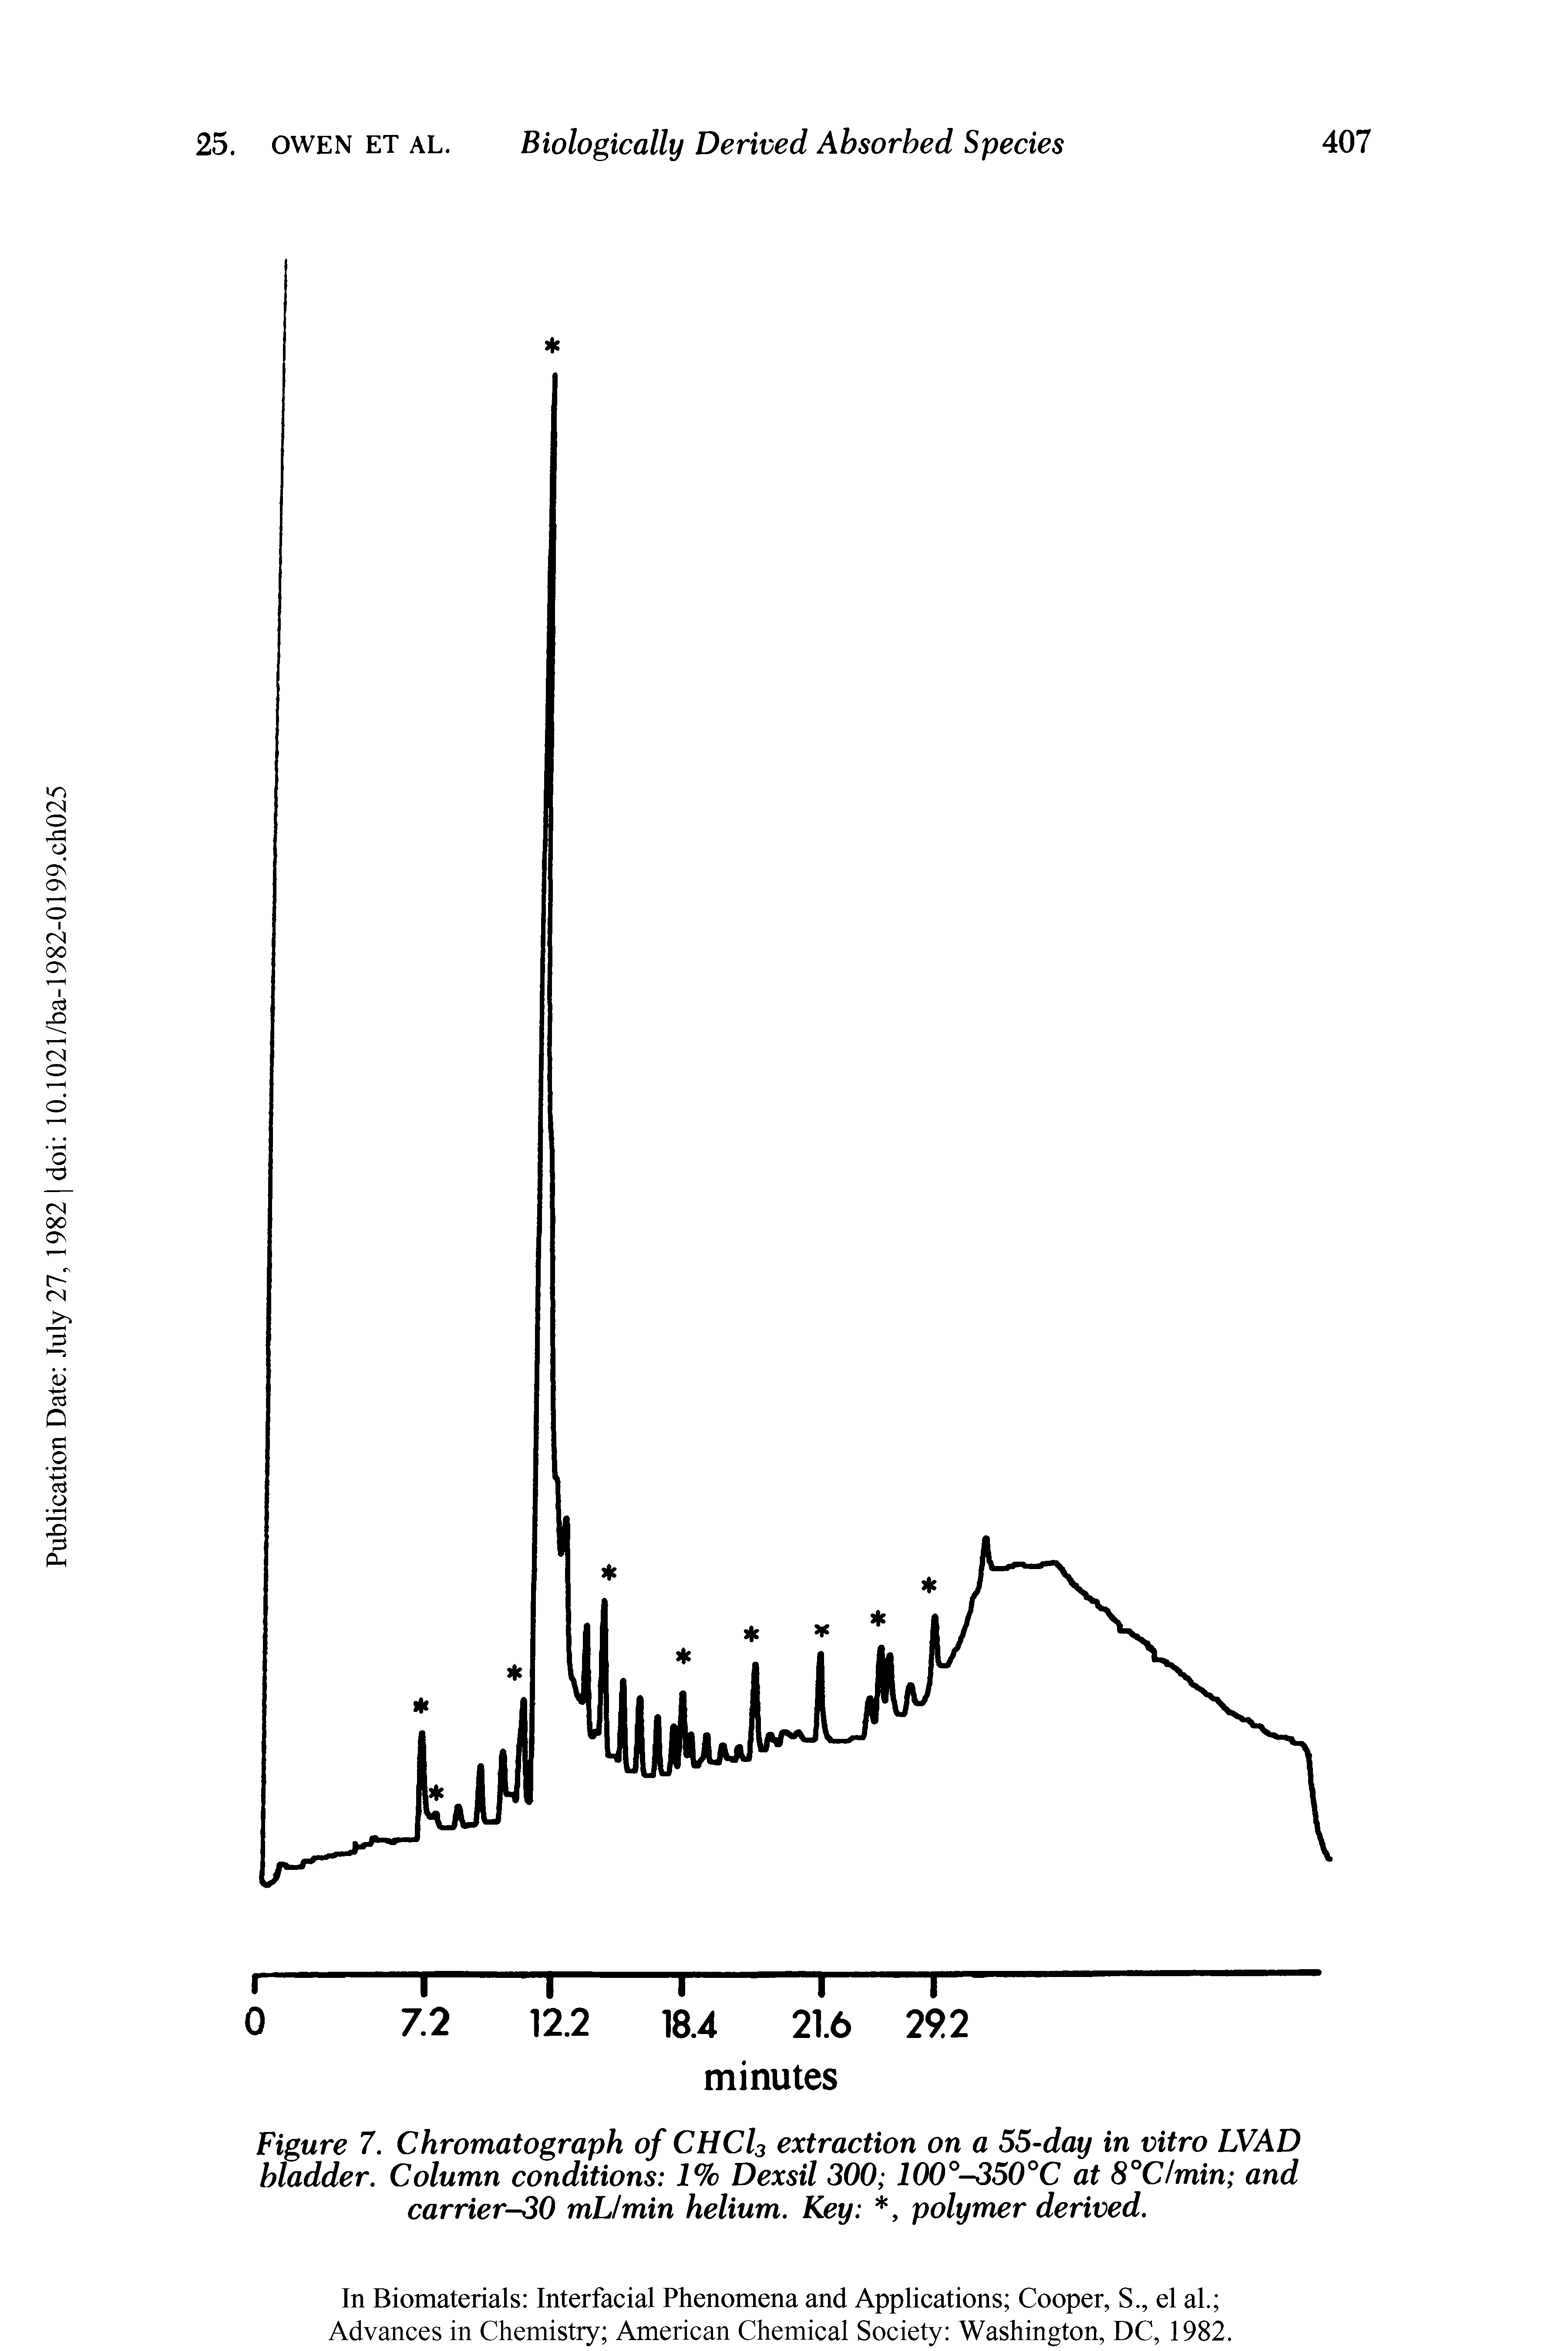 Figure 7. Chromatograph of CHCl3 extraction on a 55-day in vitro LVAD bladder. Column conditions 1% Dexsil 300 100°-350°C at 8°C/min and carrier-30 mL/min helium. Key , polymer derived.